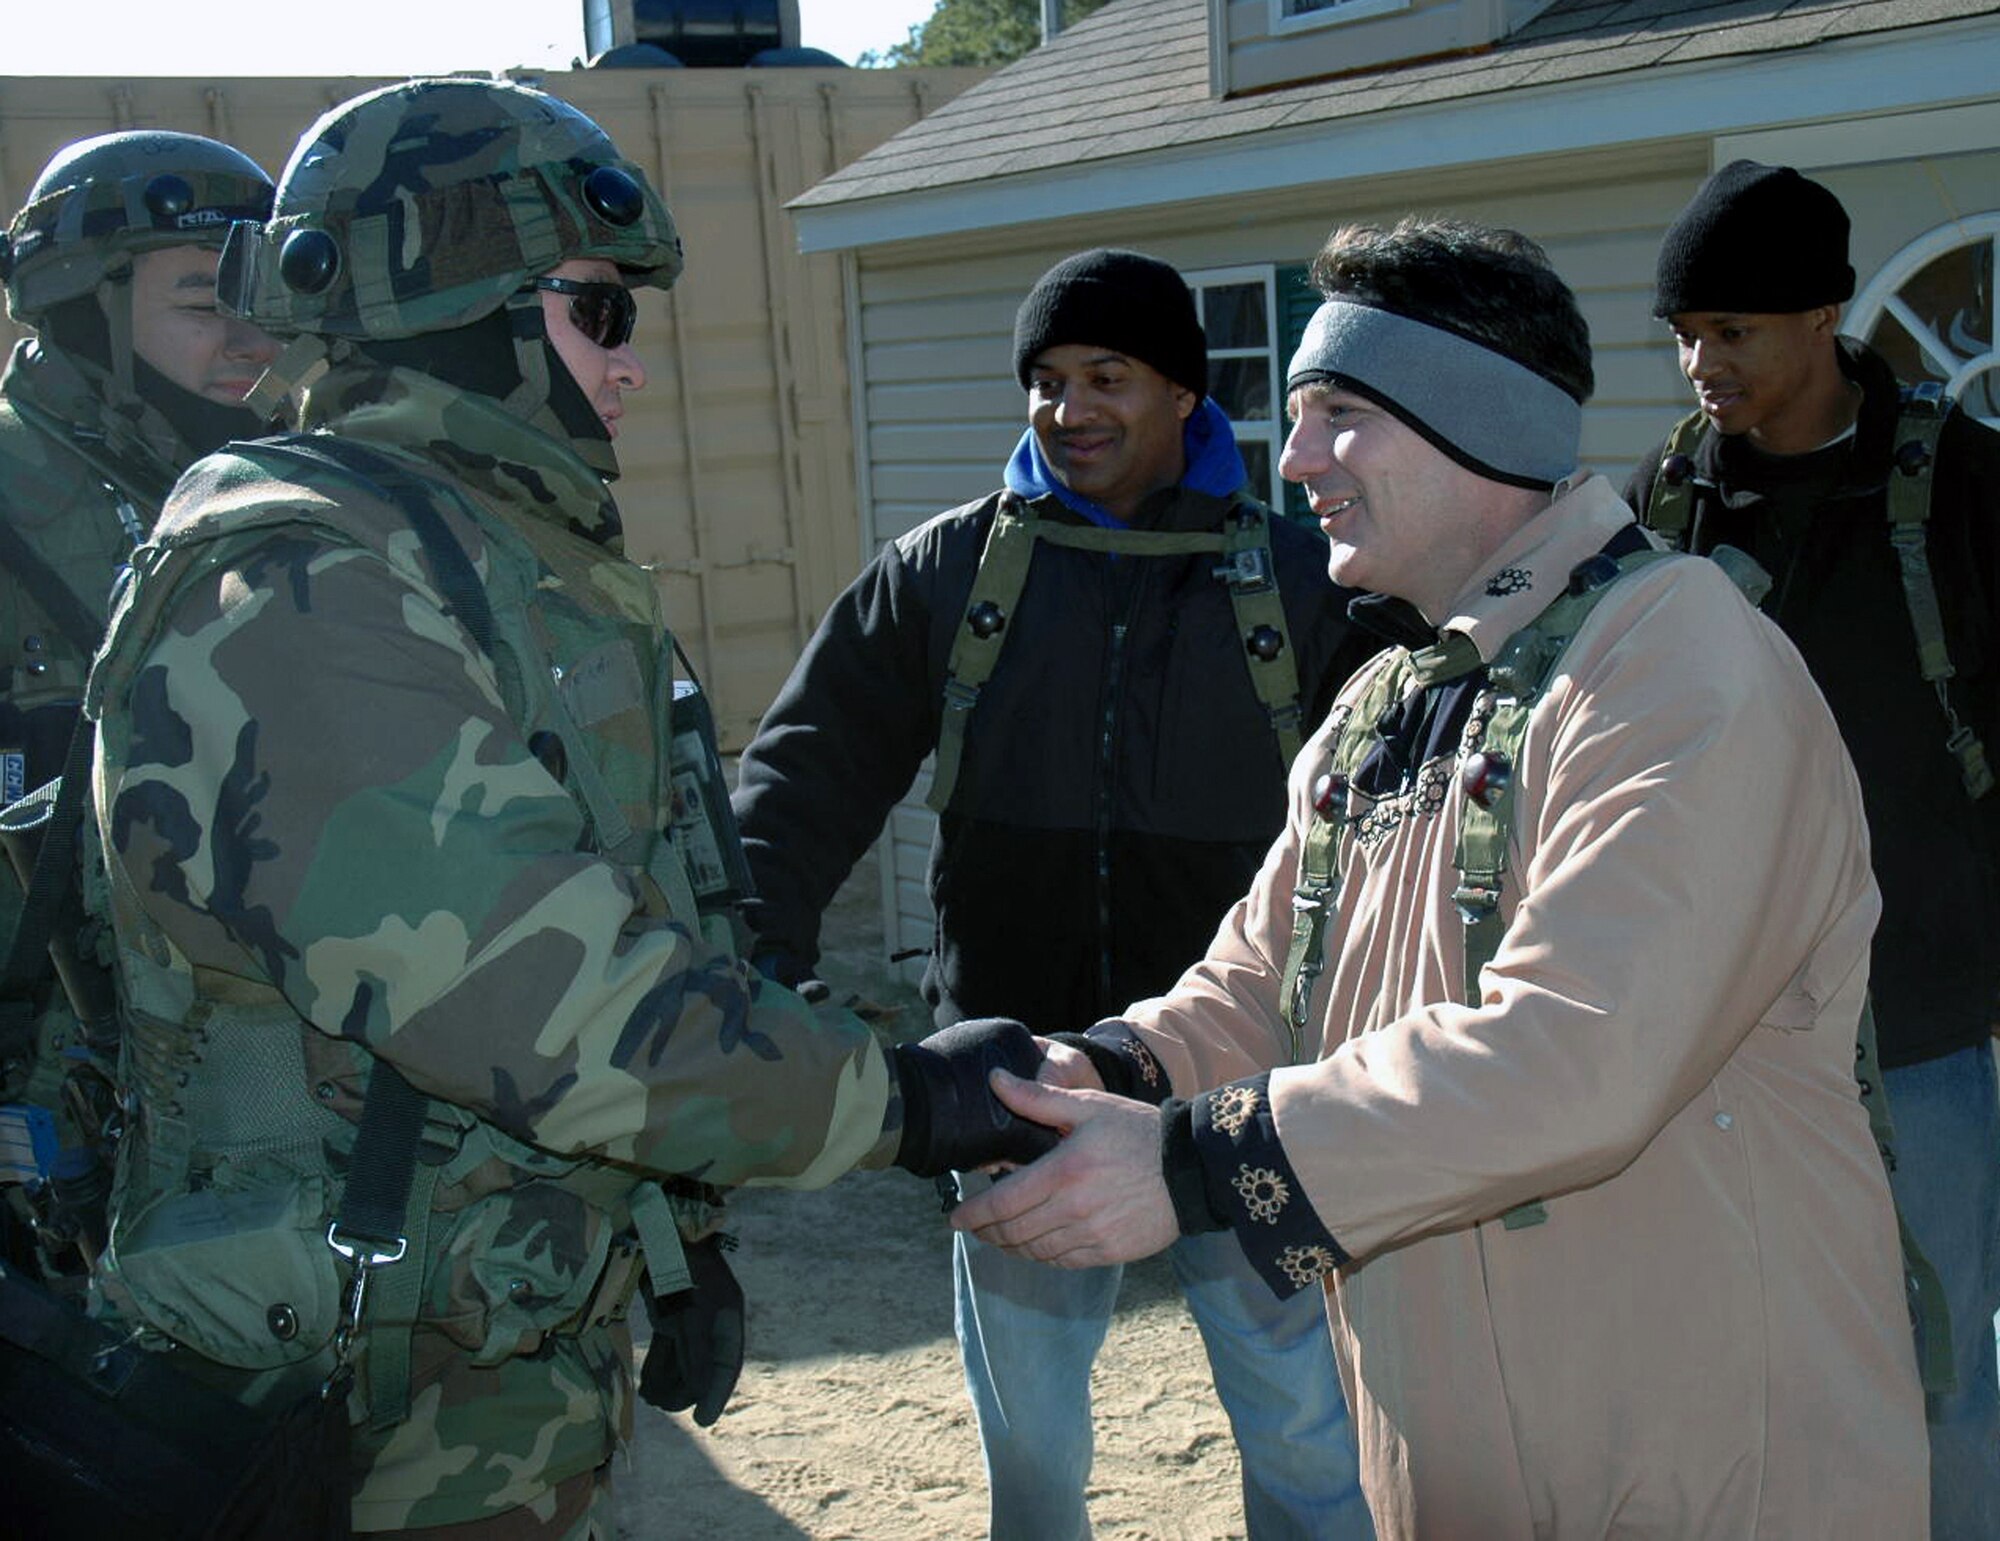 Airmen deployed as part of Air Force Exercise Eagle Flag 07-3 shake hands during a planned scenario in "Citheron" village Feb. 11 at Naval Air Engineering Station Lakehurst, N.J. The exercise, operated by the Air Mobility Warfare Center's 421st Combat Training Squadron, tests and trains more than 400 Airmen on their expeditionary combat support skills. (U.S. Air Force photo/Tech. Sgt. Ron Rogers) 